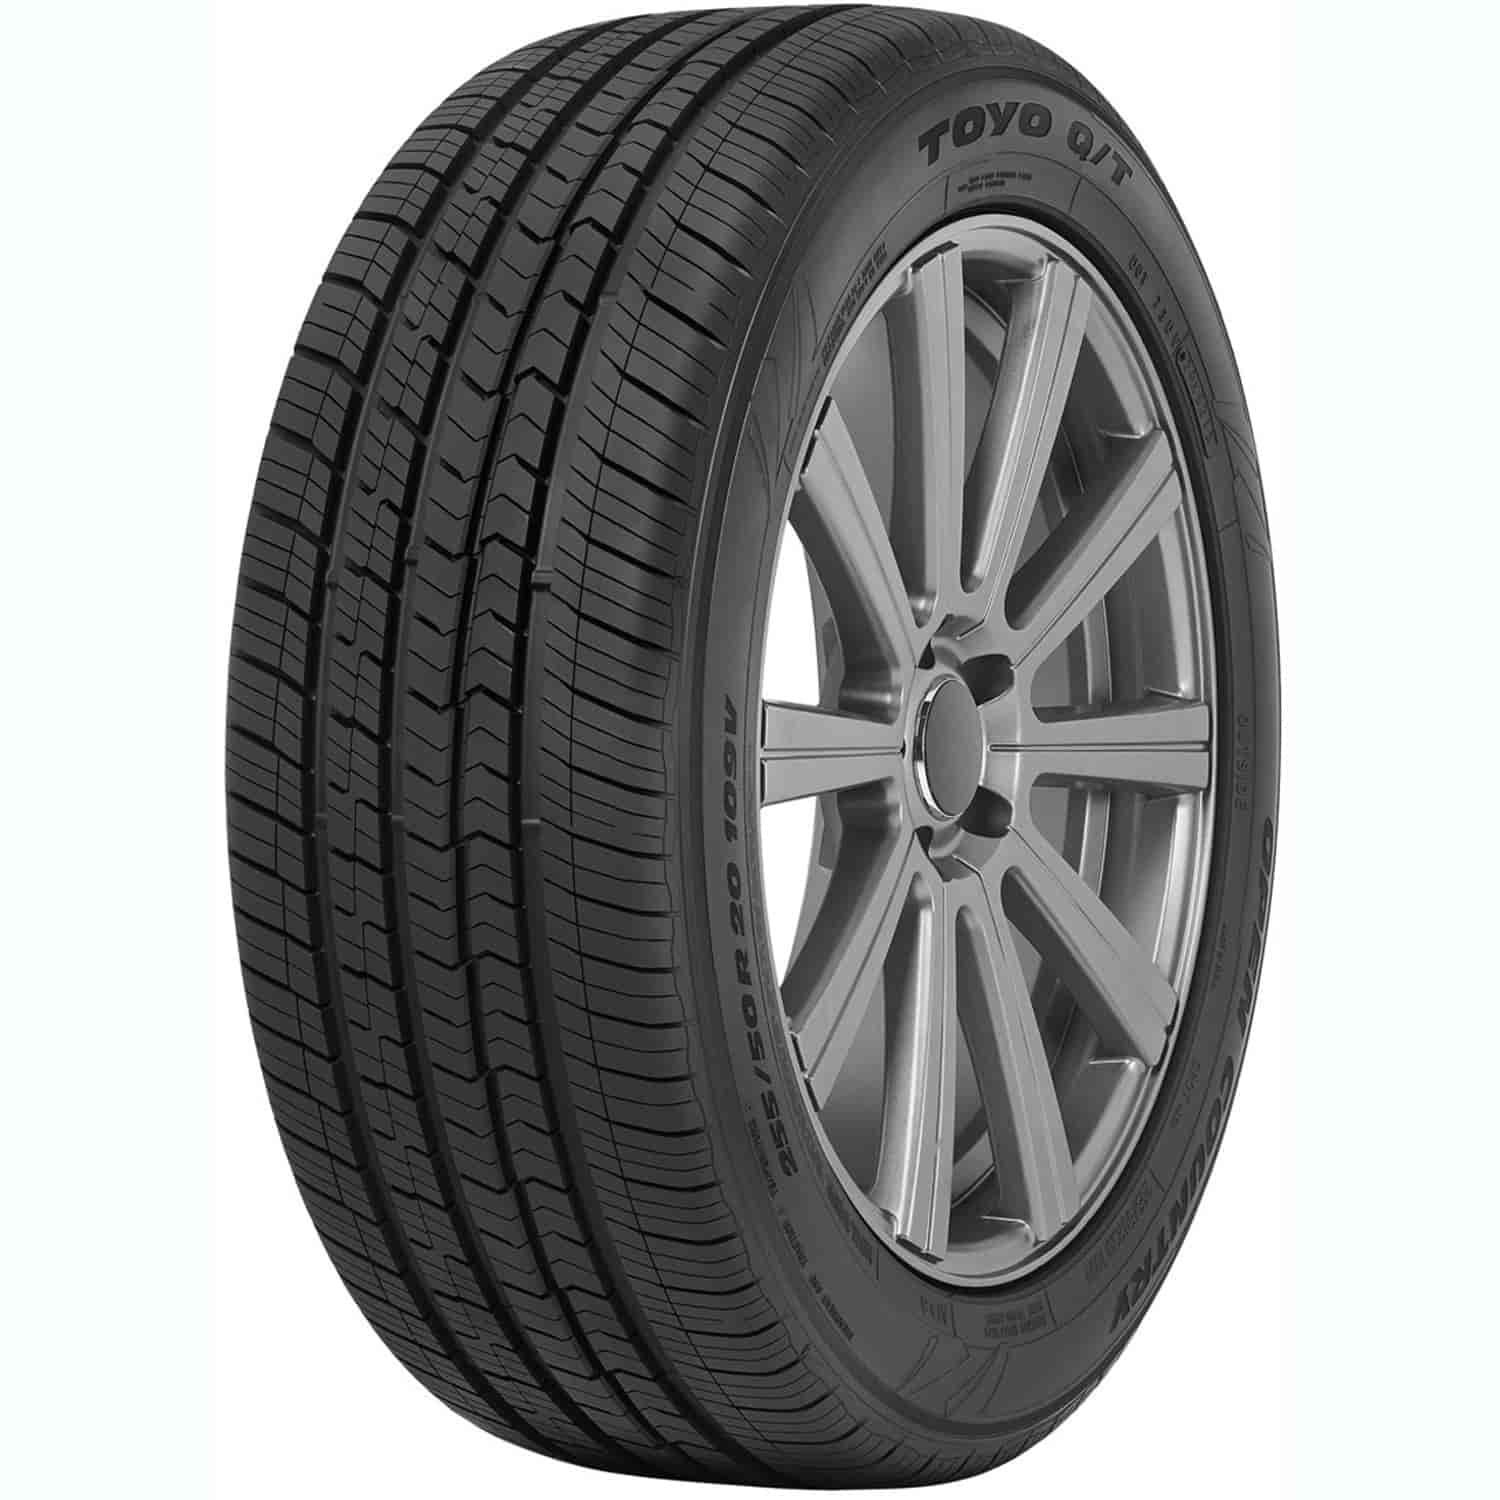 OPEN COUNTRY Q/T 255/60R18 112V XL